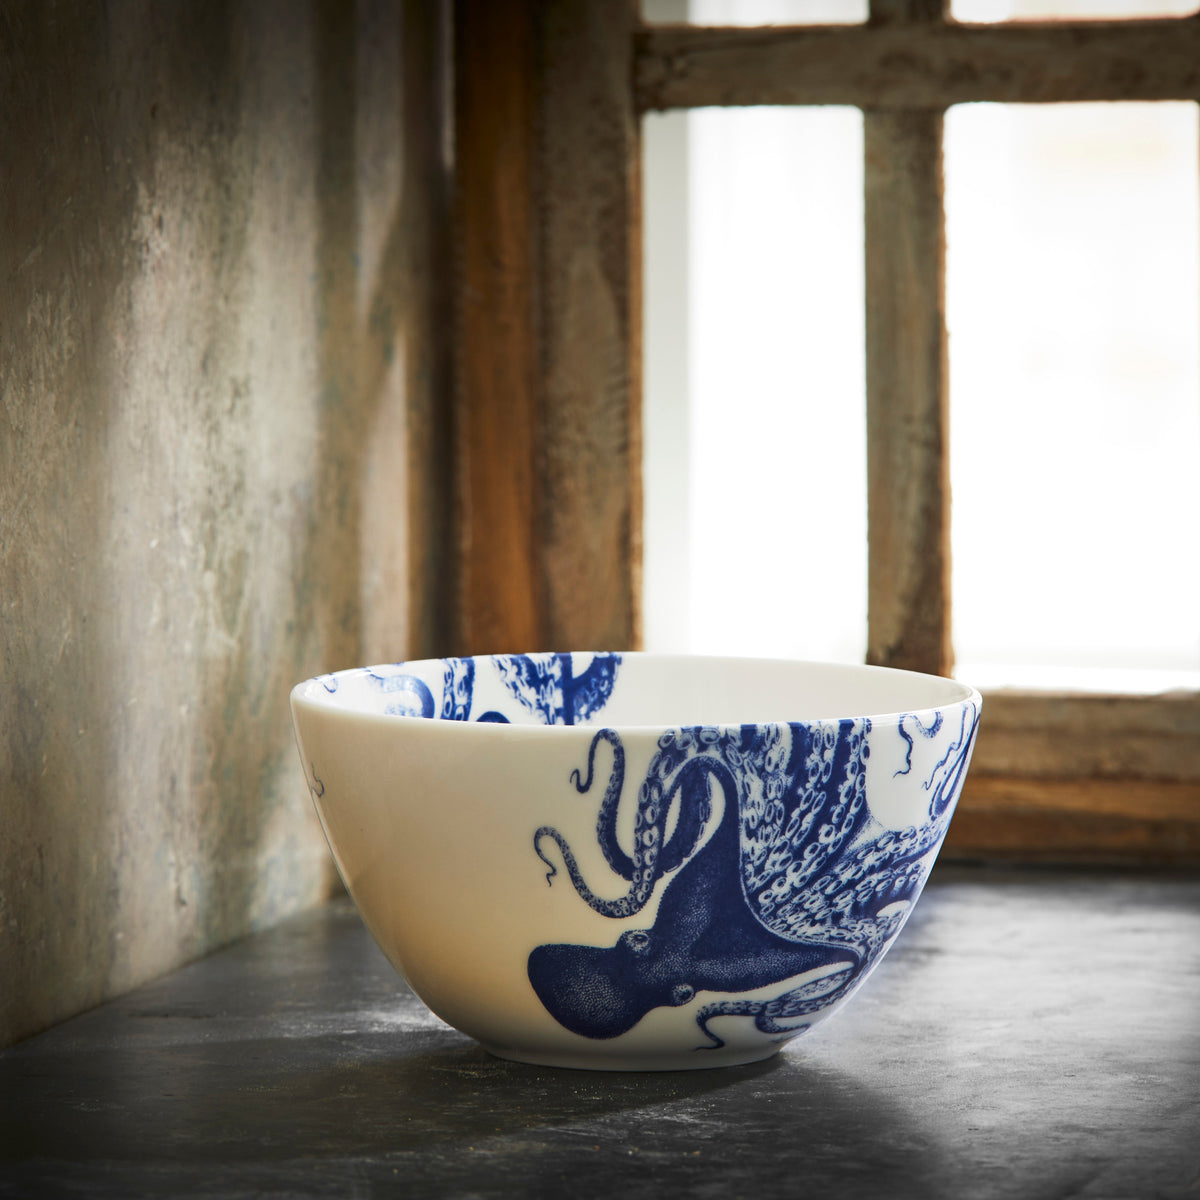 A Lucy Tall Cereal Bowl by Caskata sitting on a window sill.